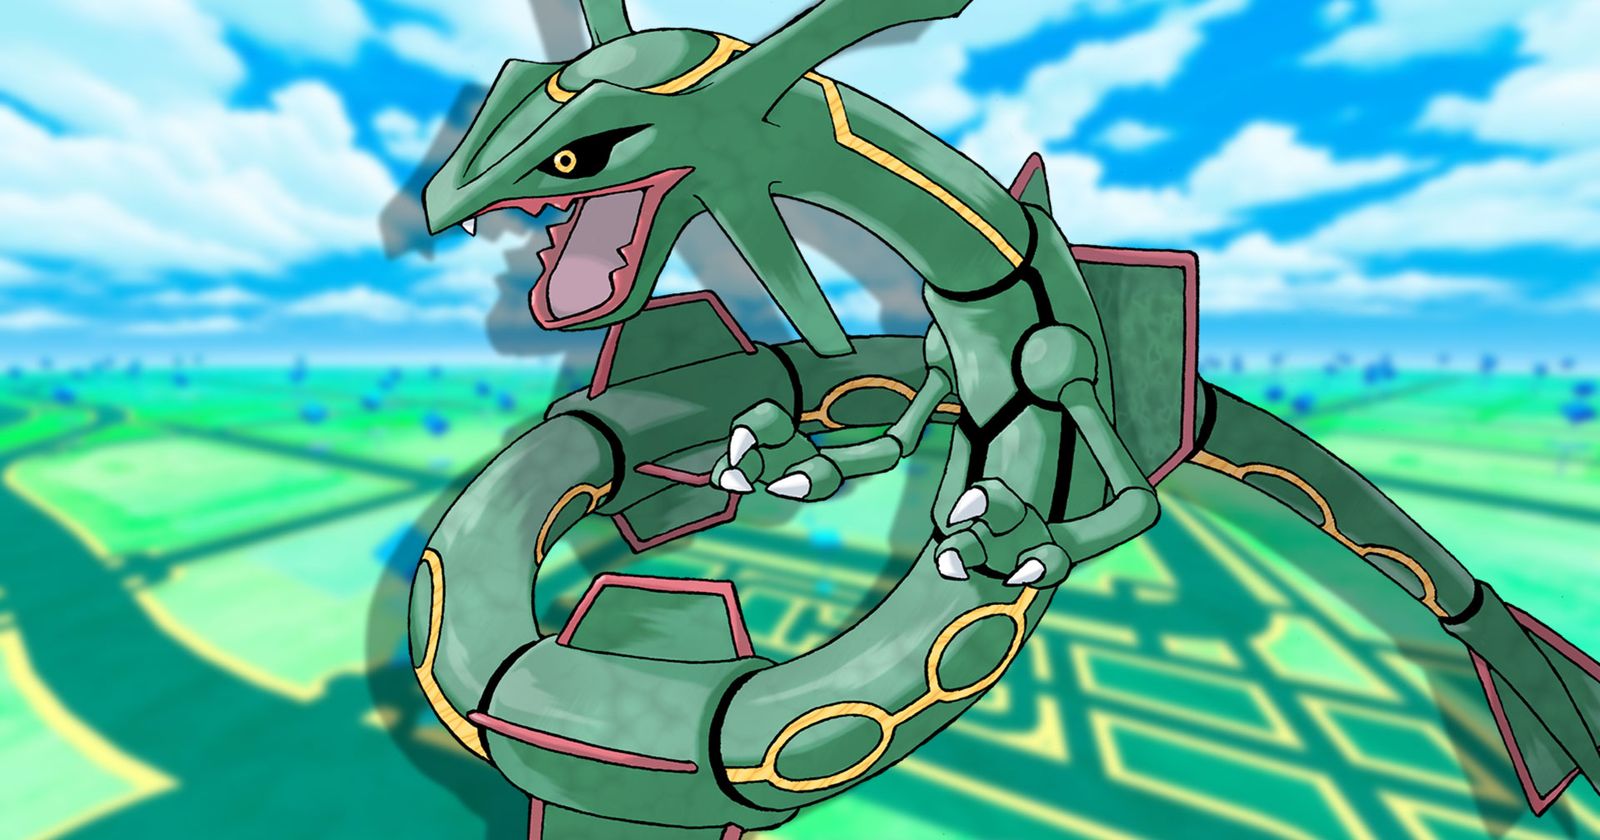 Pokémon Go' Shiny Rayquaza Raid Event: Start Time and Best Counters